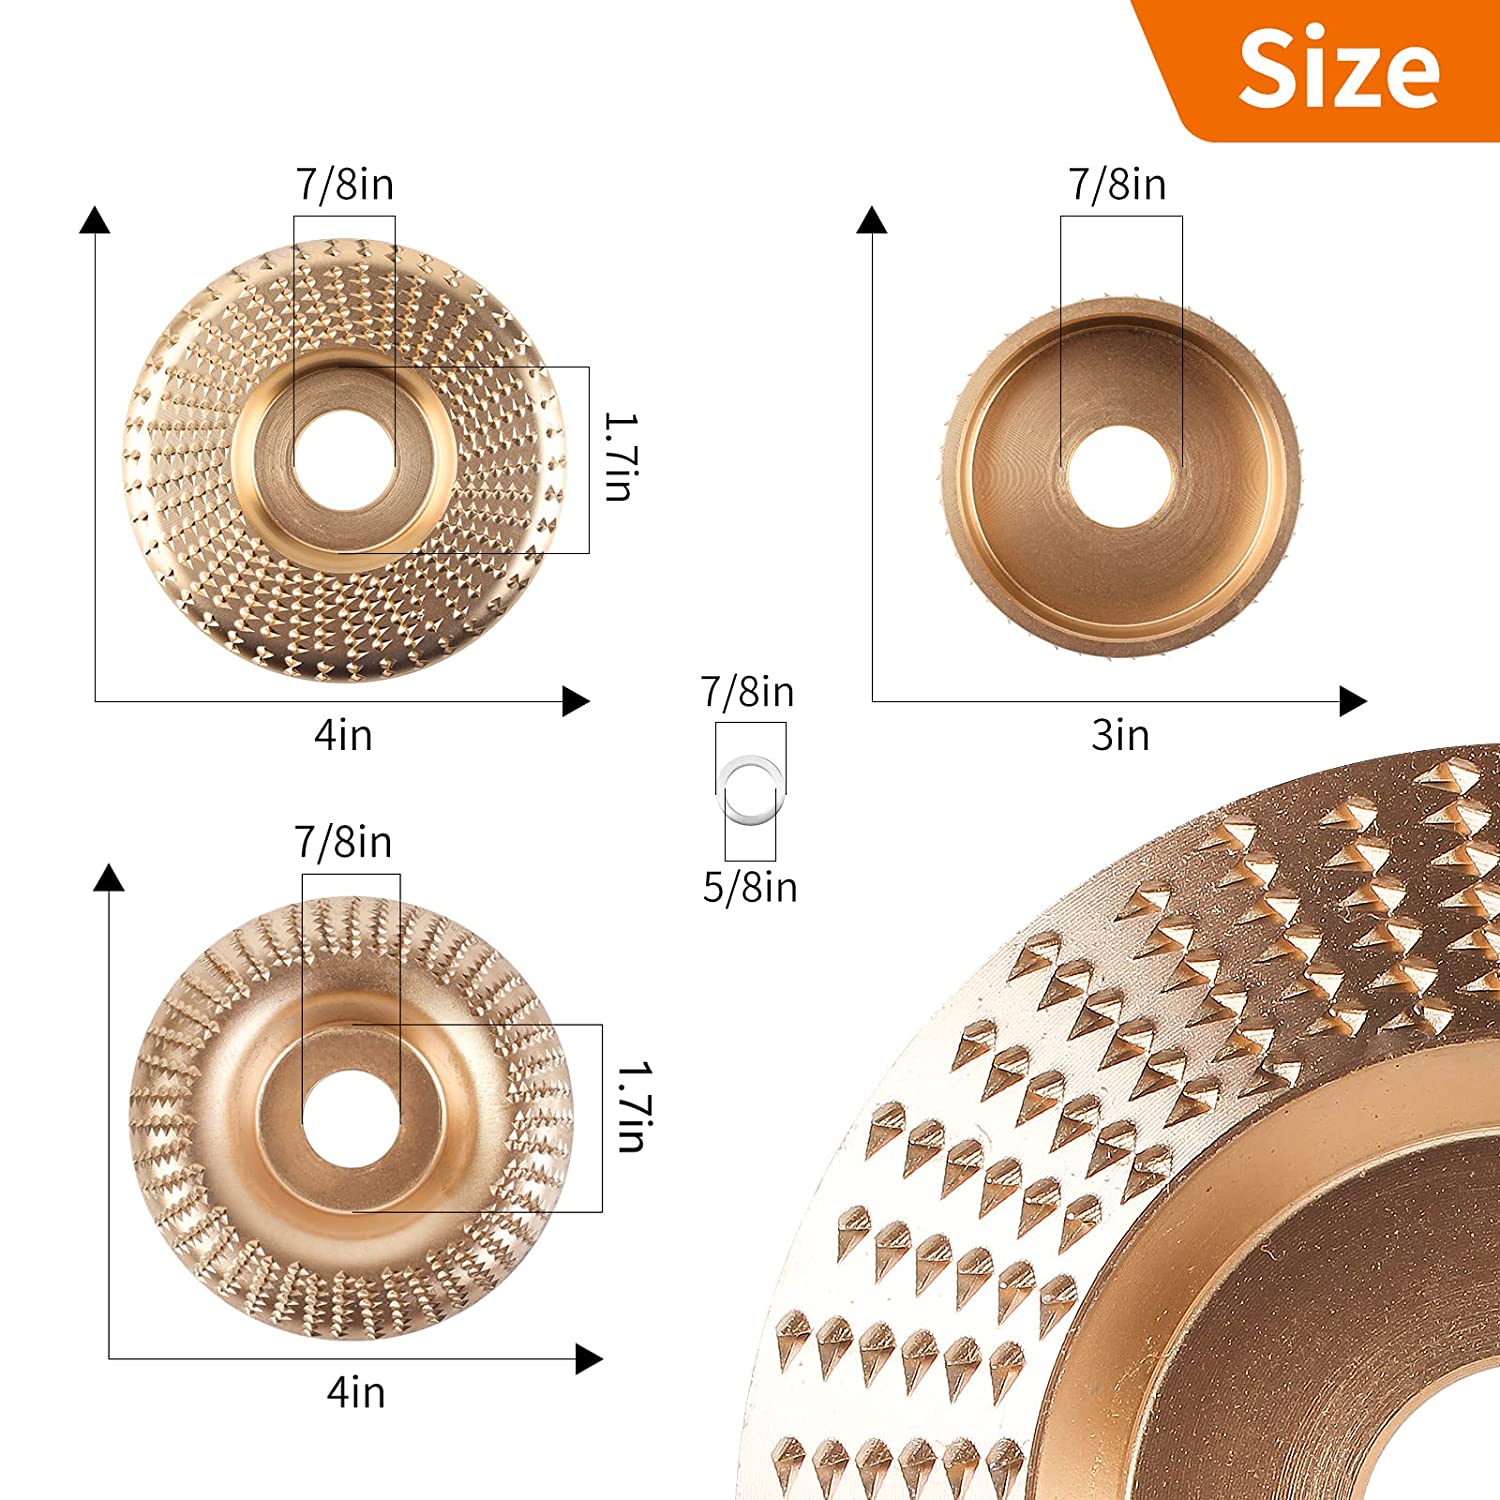 Wood Carving Disc Wood Shaping Disc Wood Shaper for Angle Grinder 4 1/2 Inch with 7/8 & 5/8 Arbor